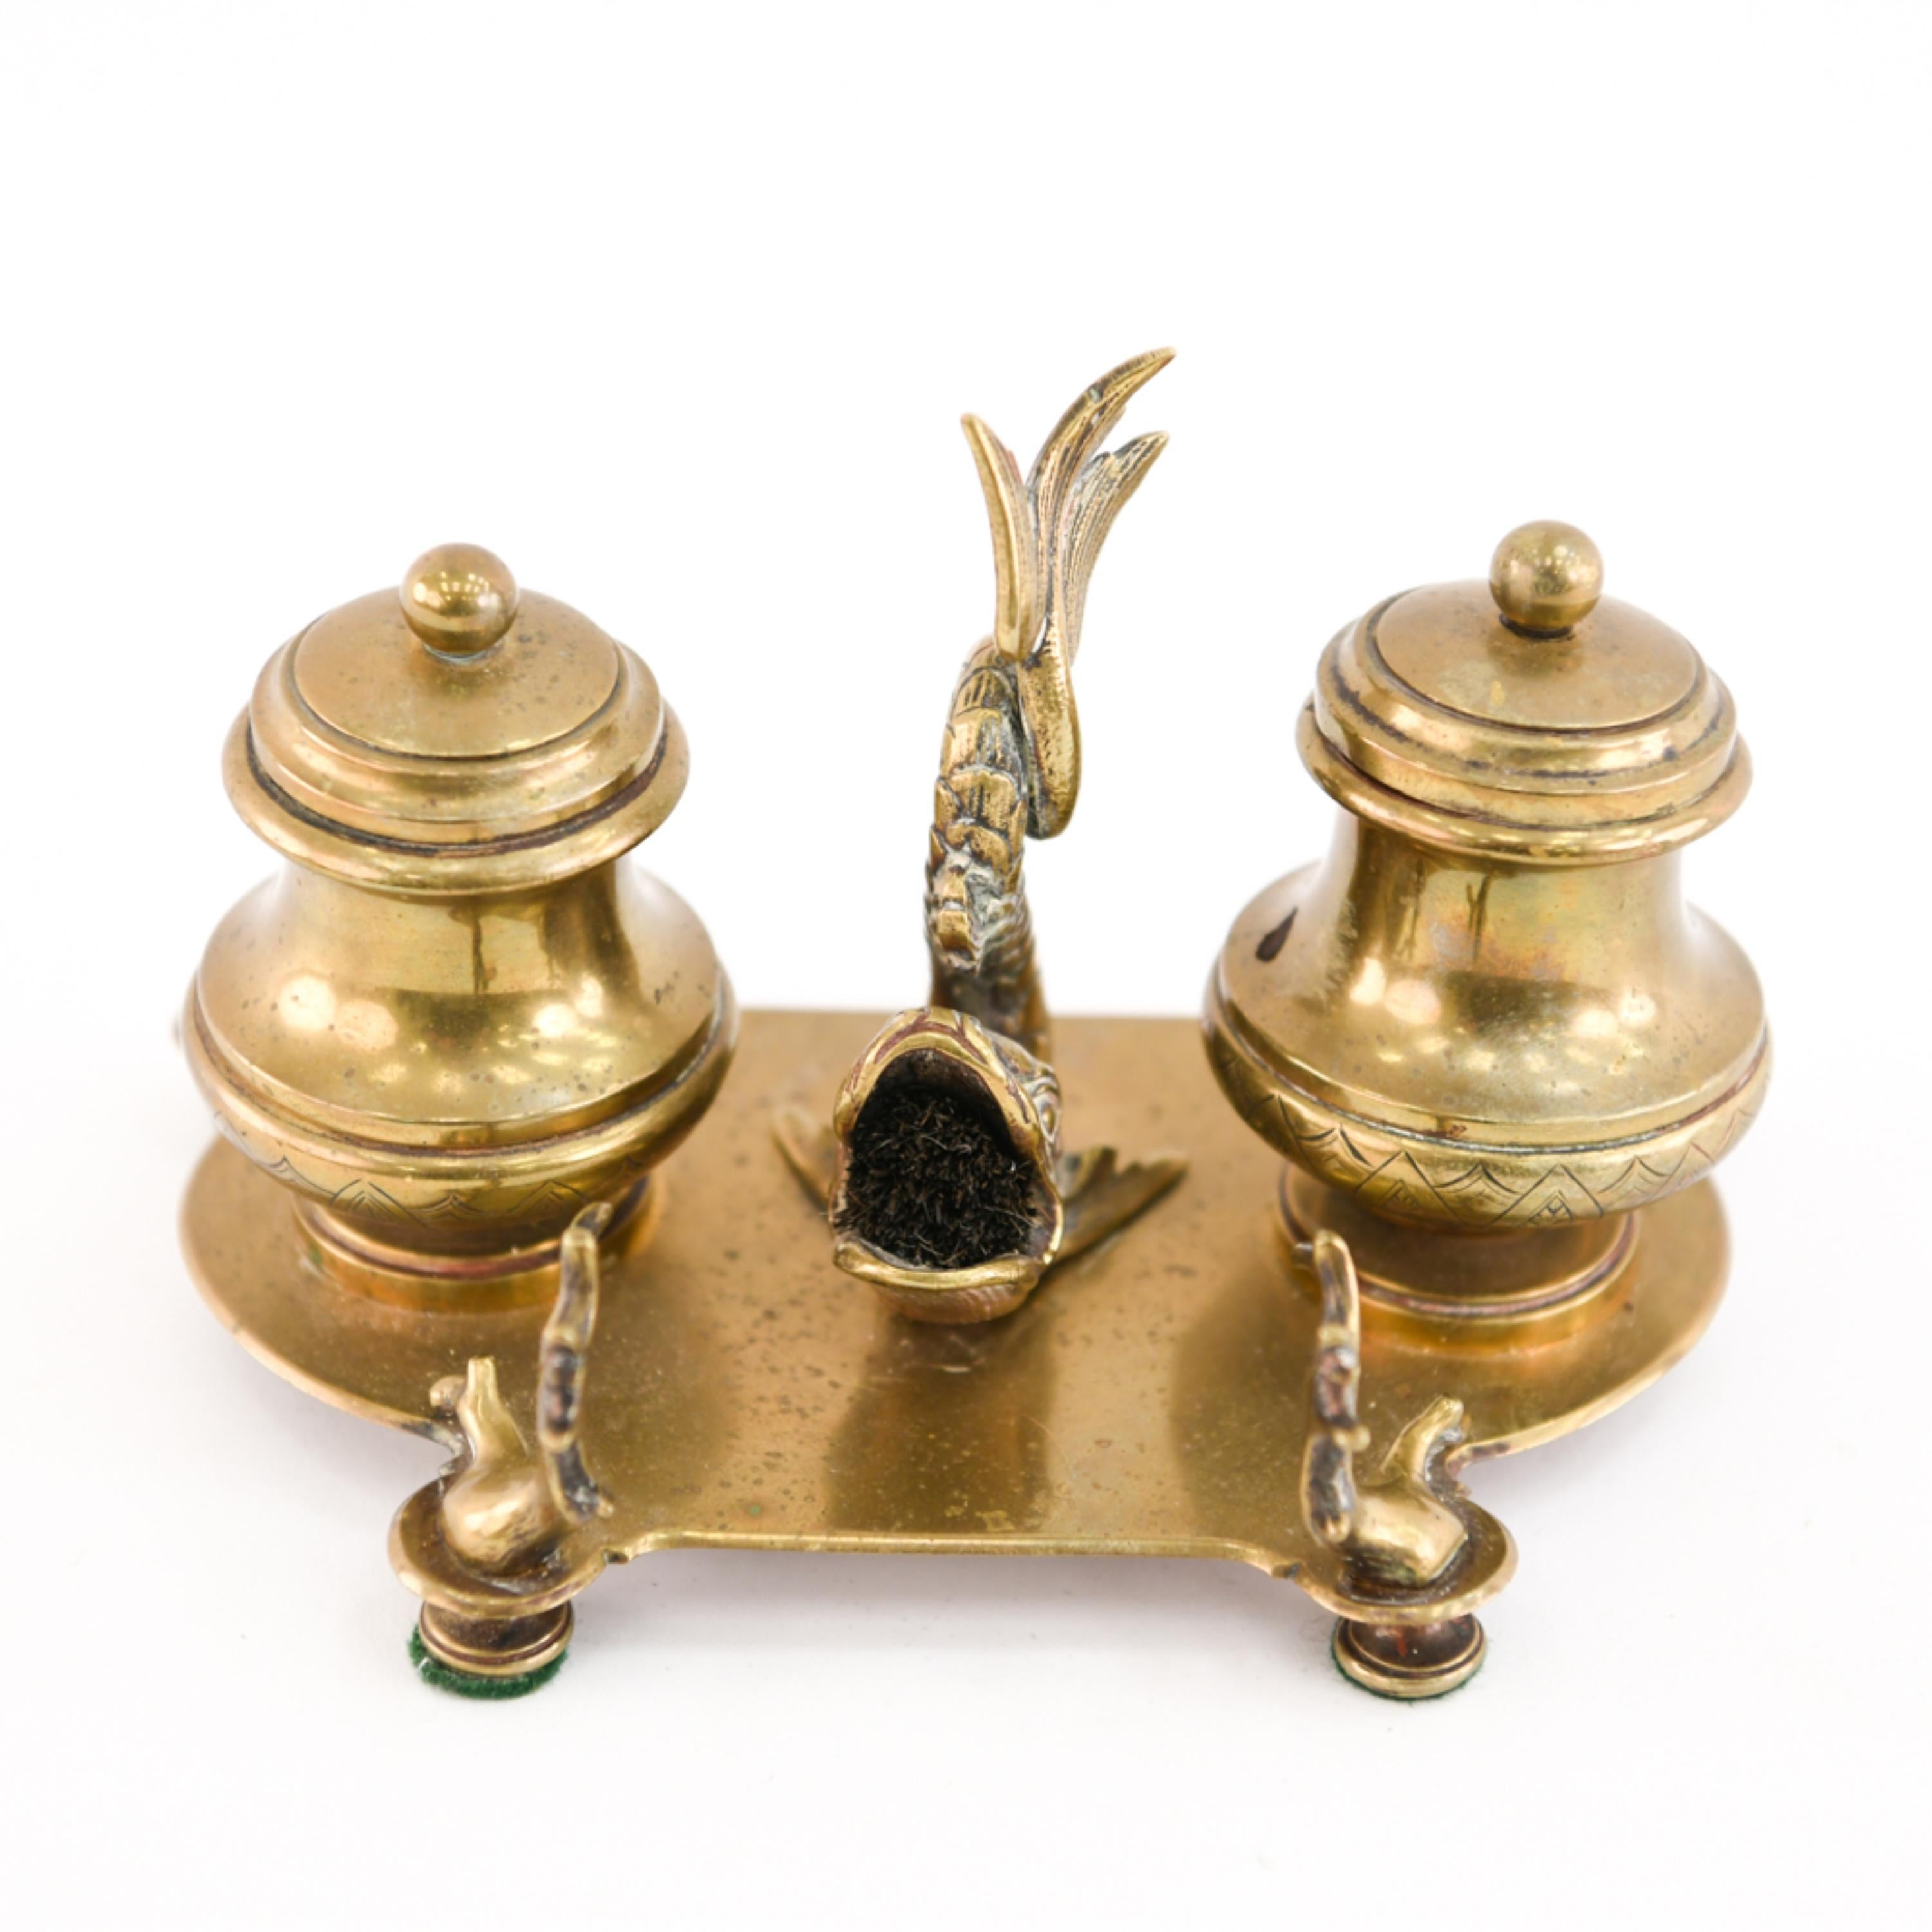 A 19th century brass double inkwell with a central dolphin figure.